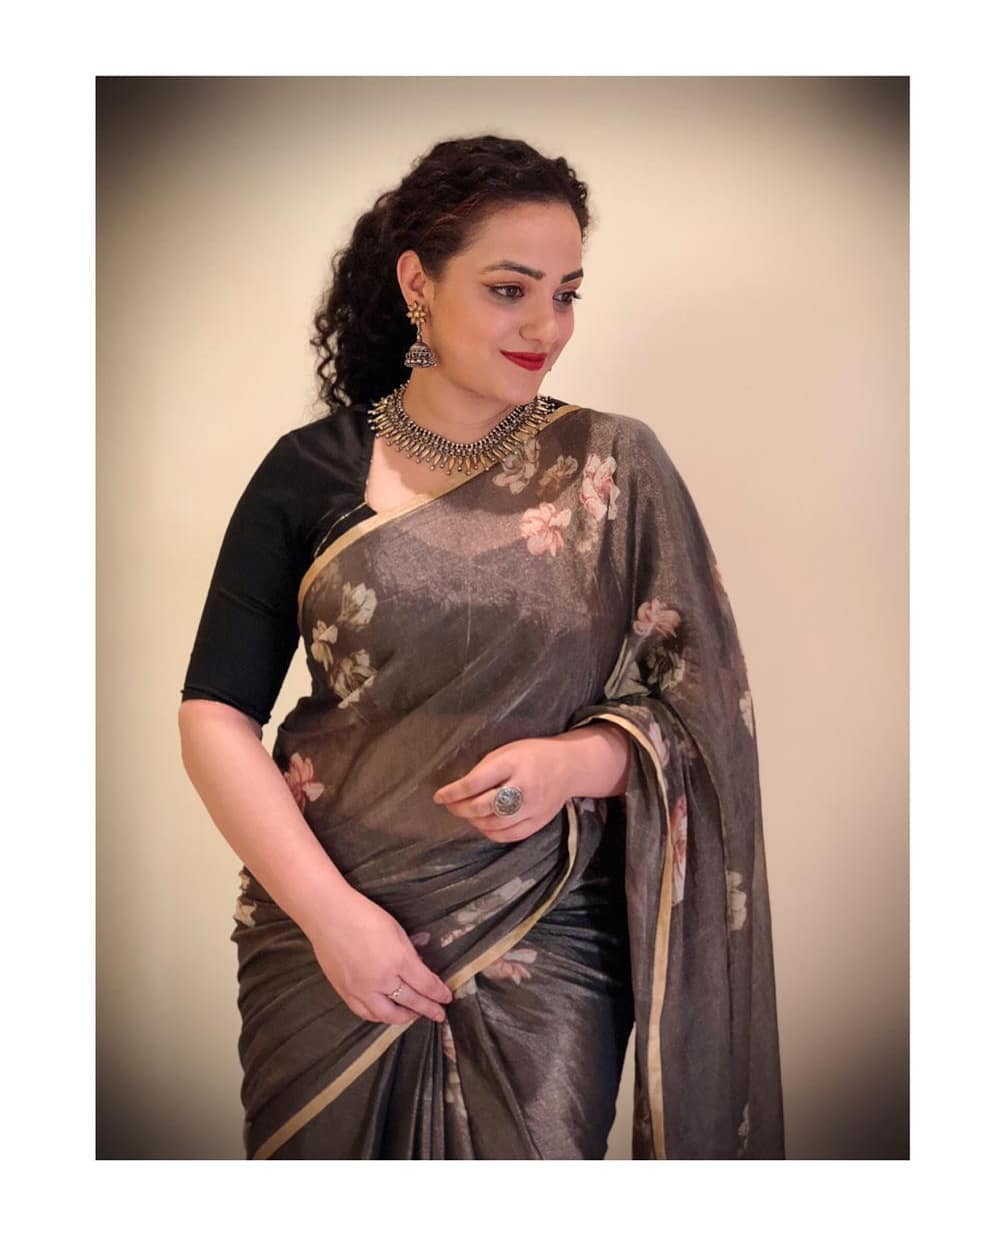 Beauty in saree